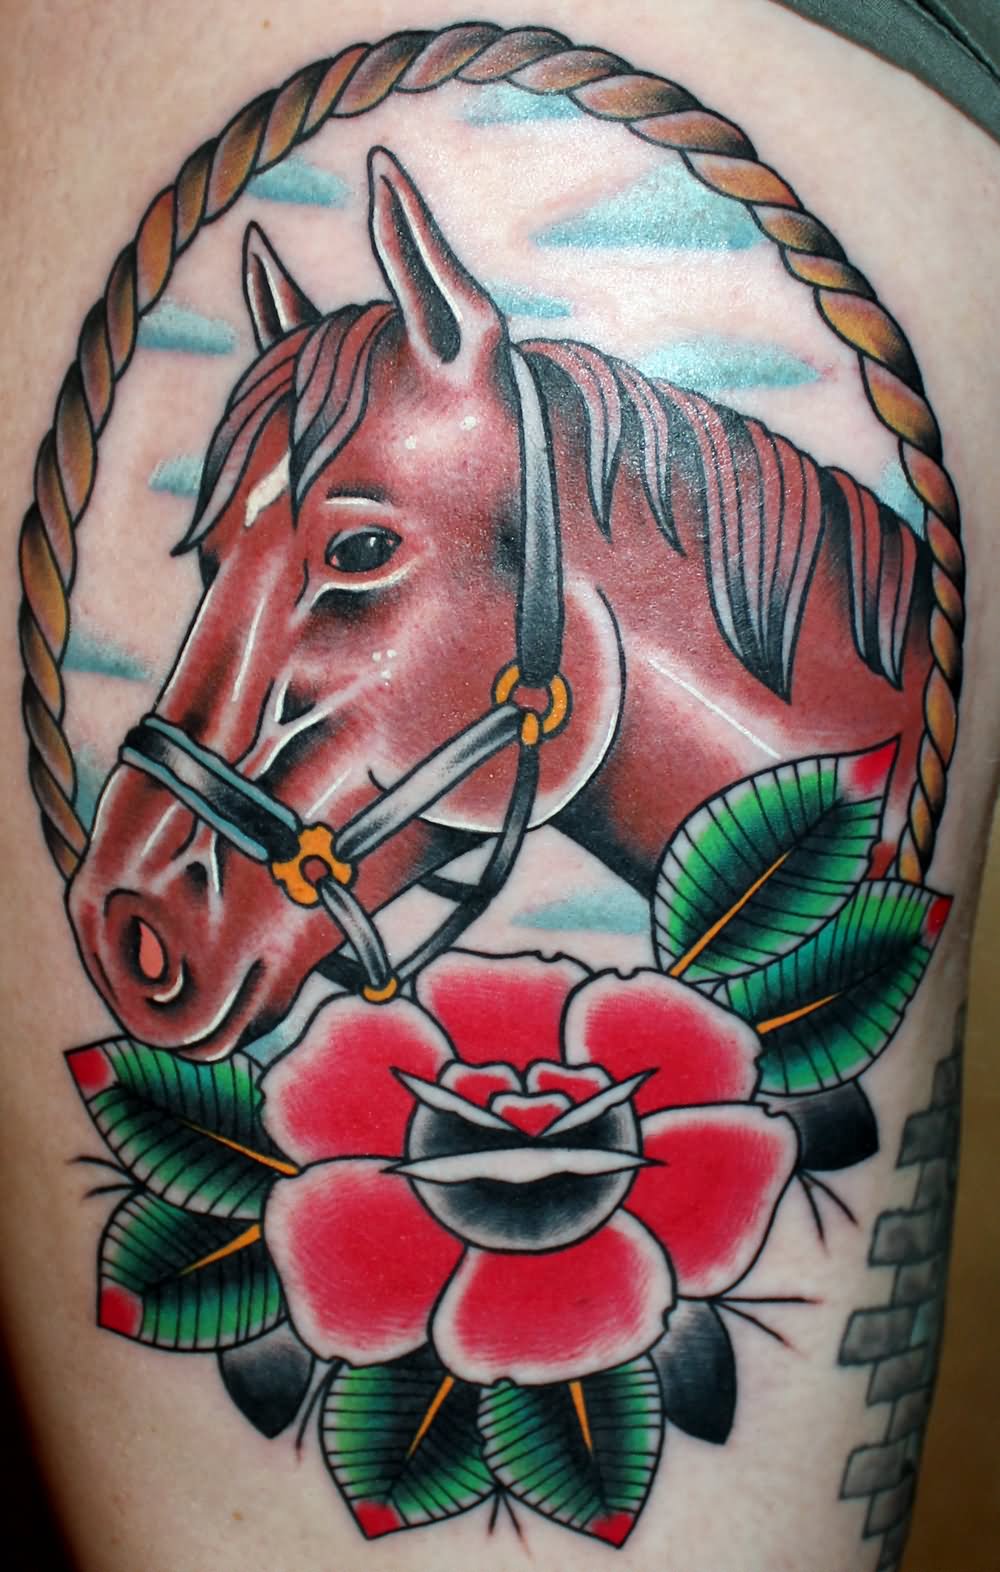 Horse with rope border tattoo on thigh